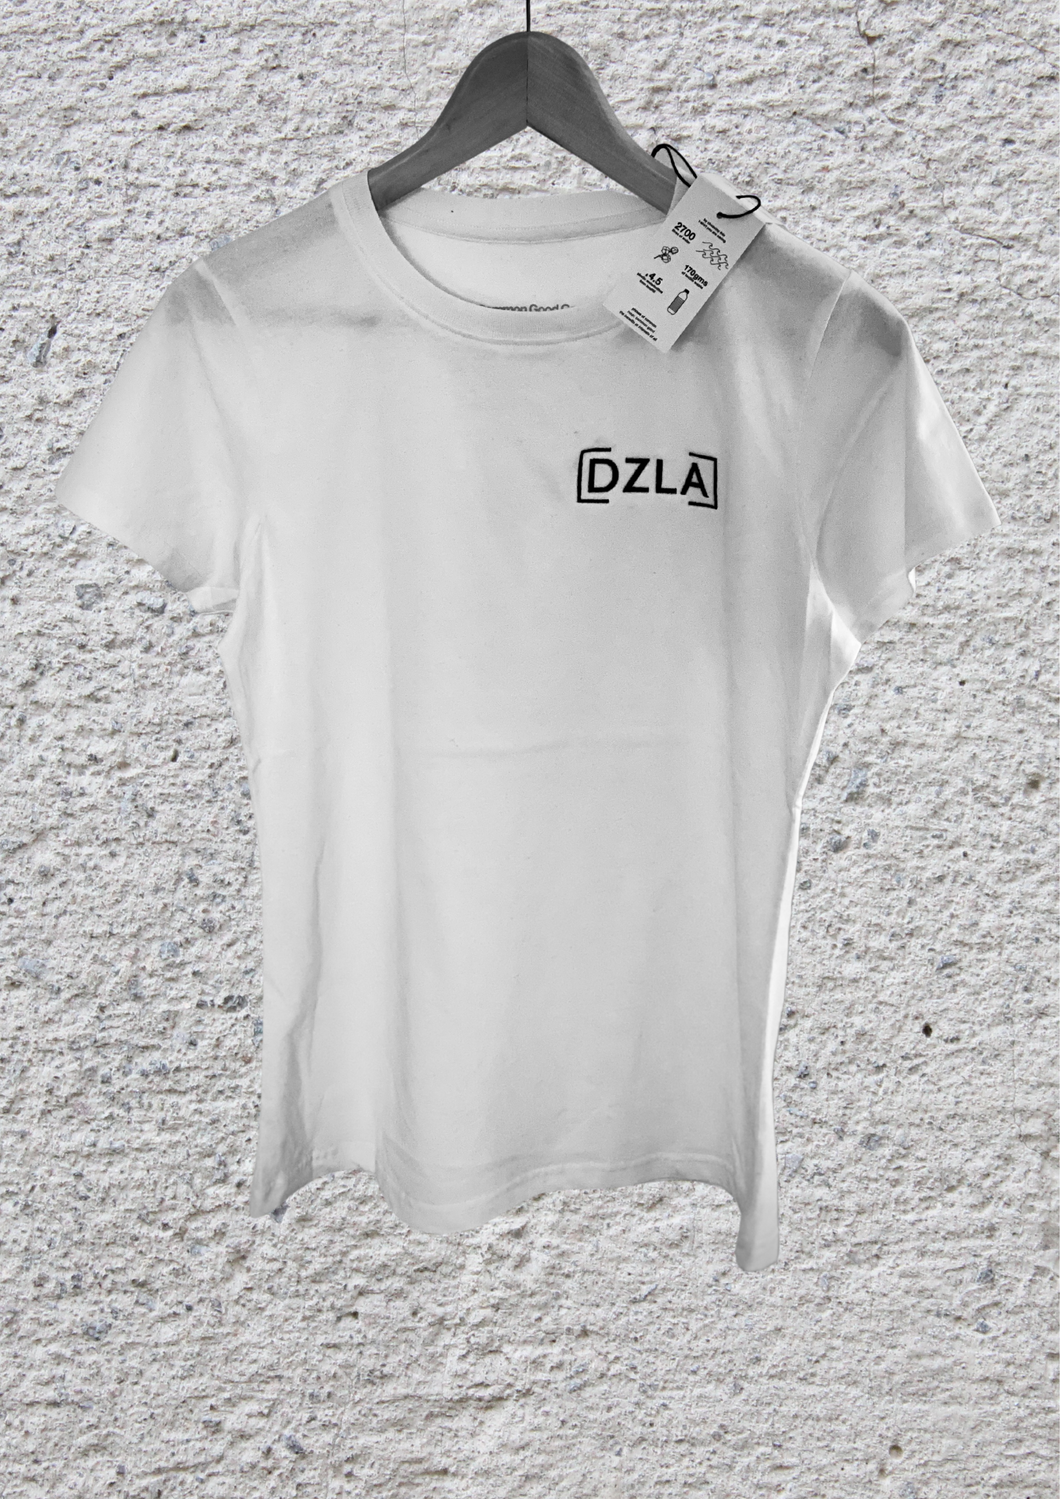 DZLA 'Our Planet' Premium Recycled Women's T-Shirt